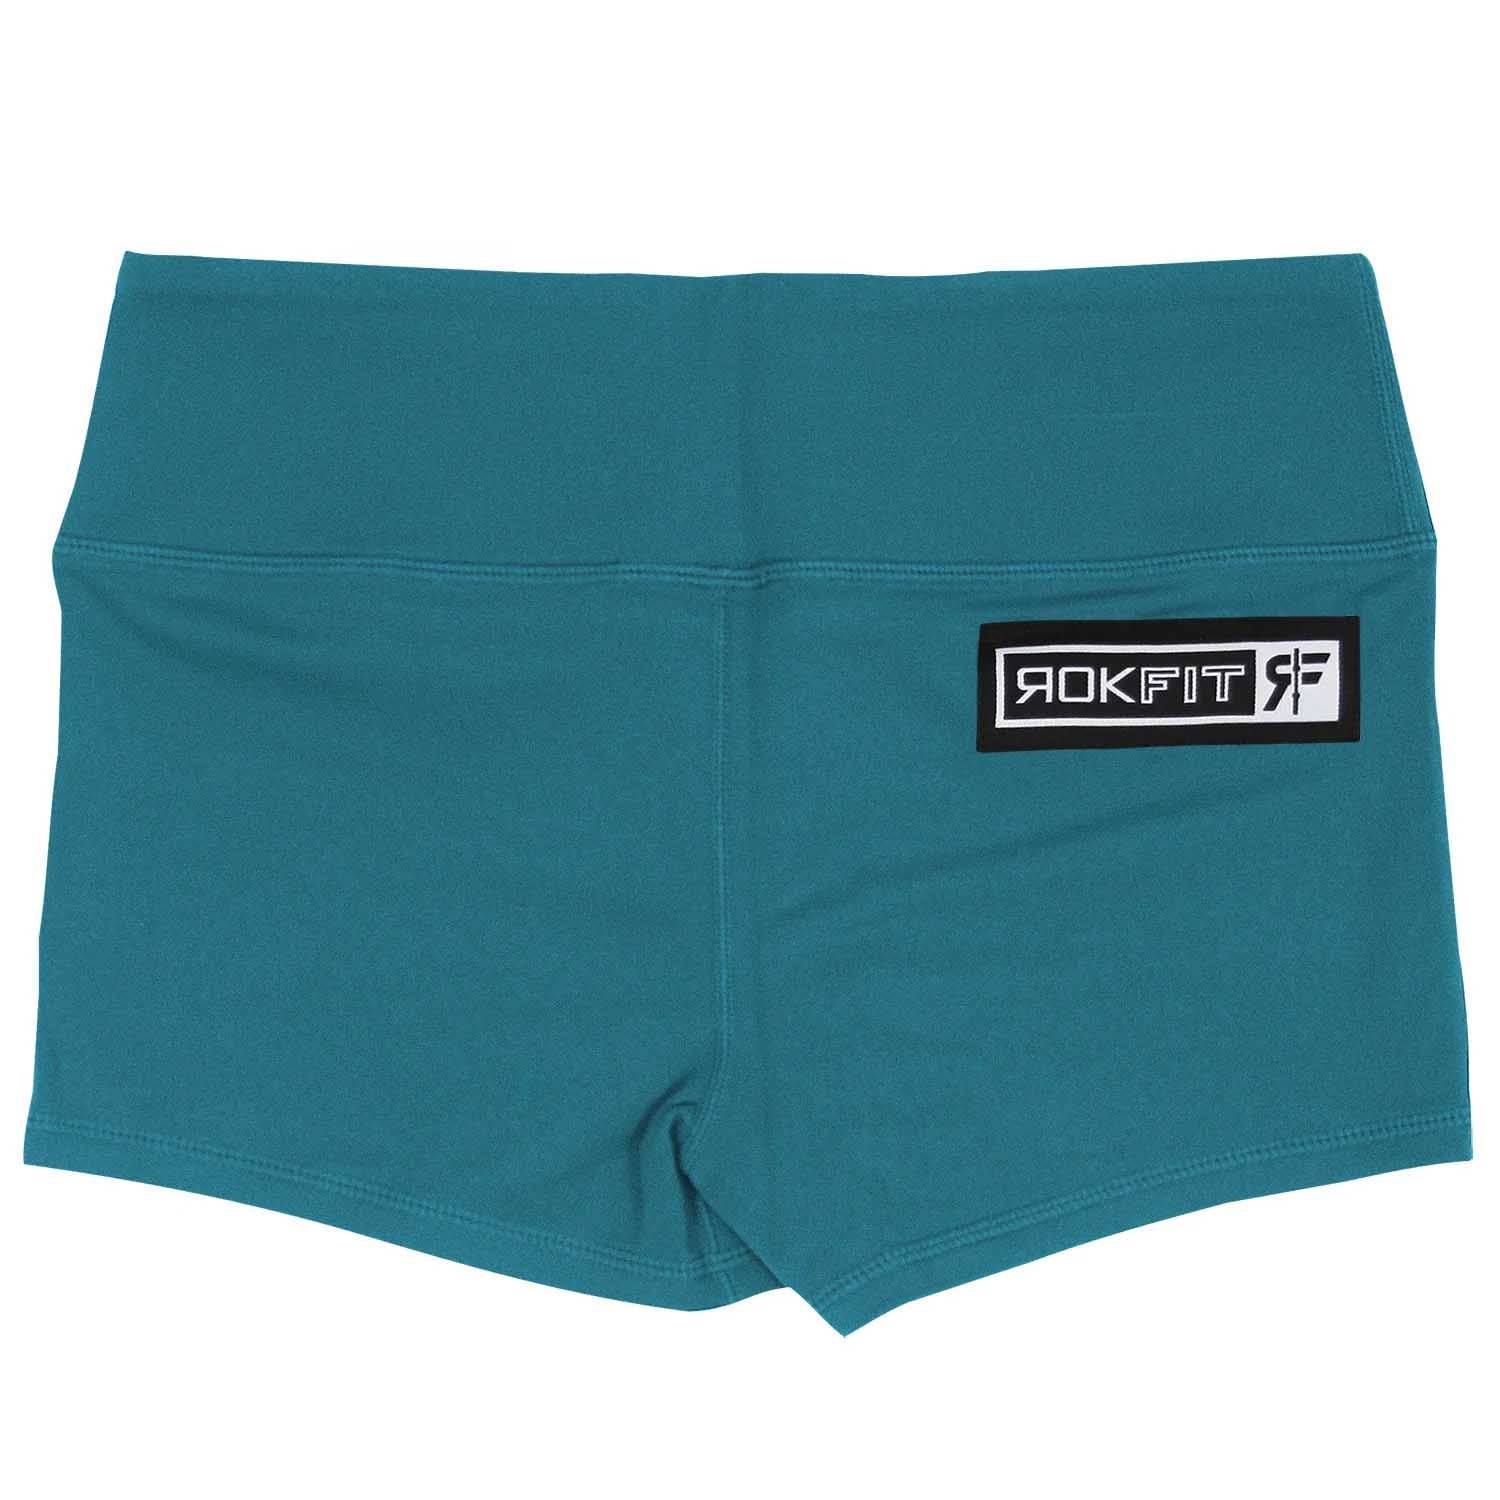 Teal Booty Shorts